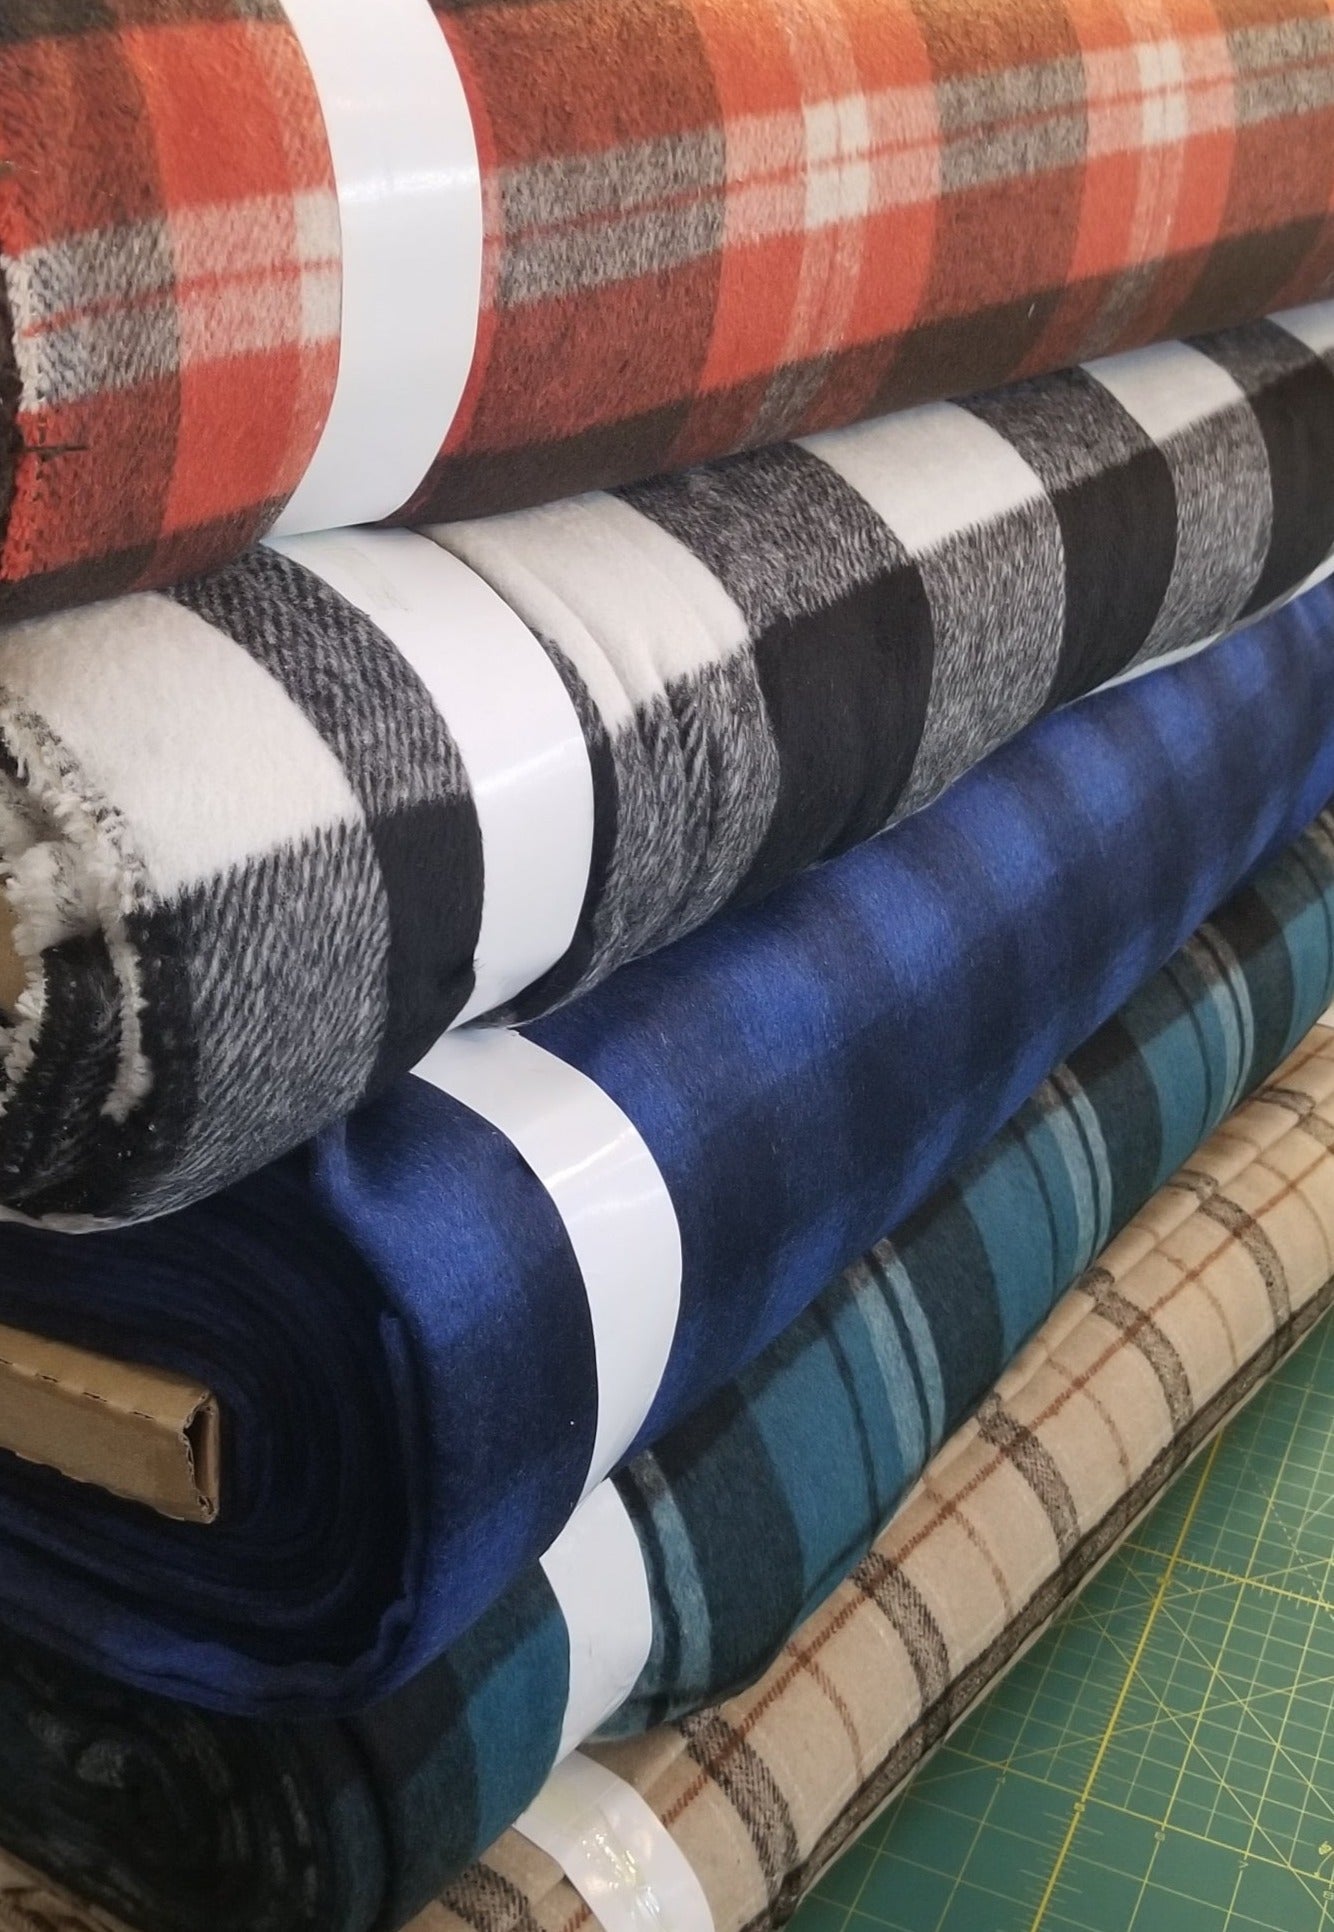 LA FINCH 5 yard precuts: 5 yards of Wool Blend Melton  Brushed on Both Sides Blue Check Plaid Woven